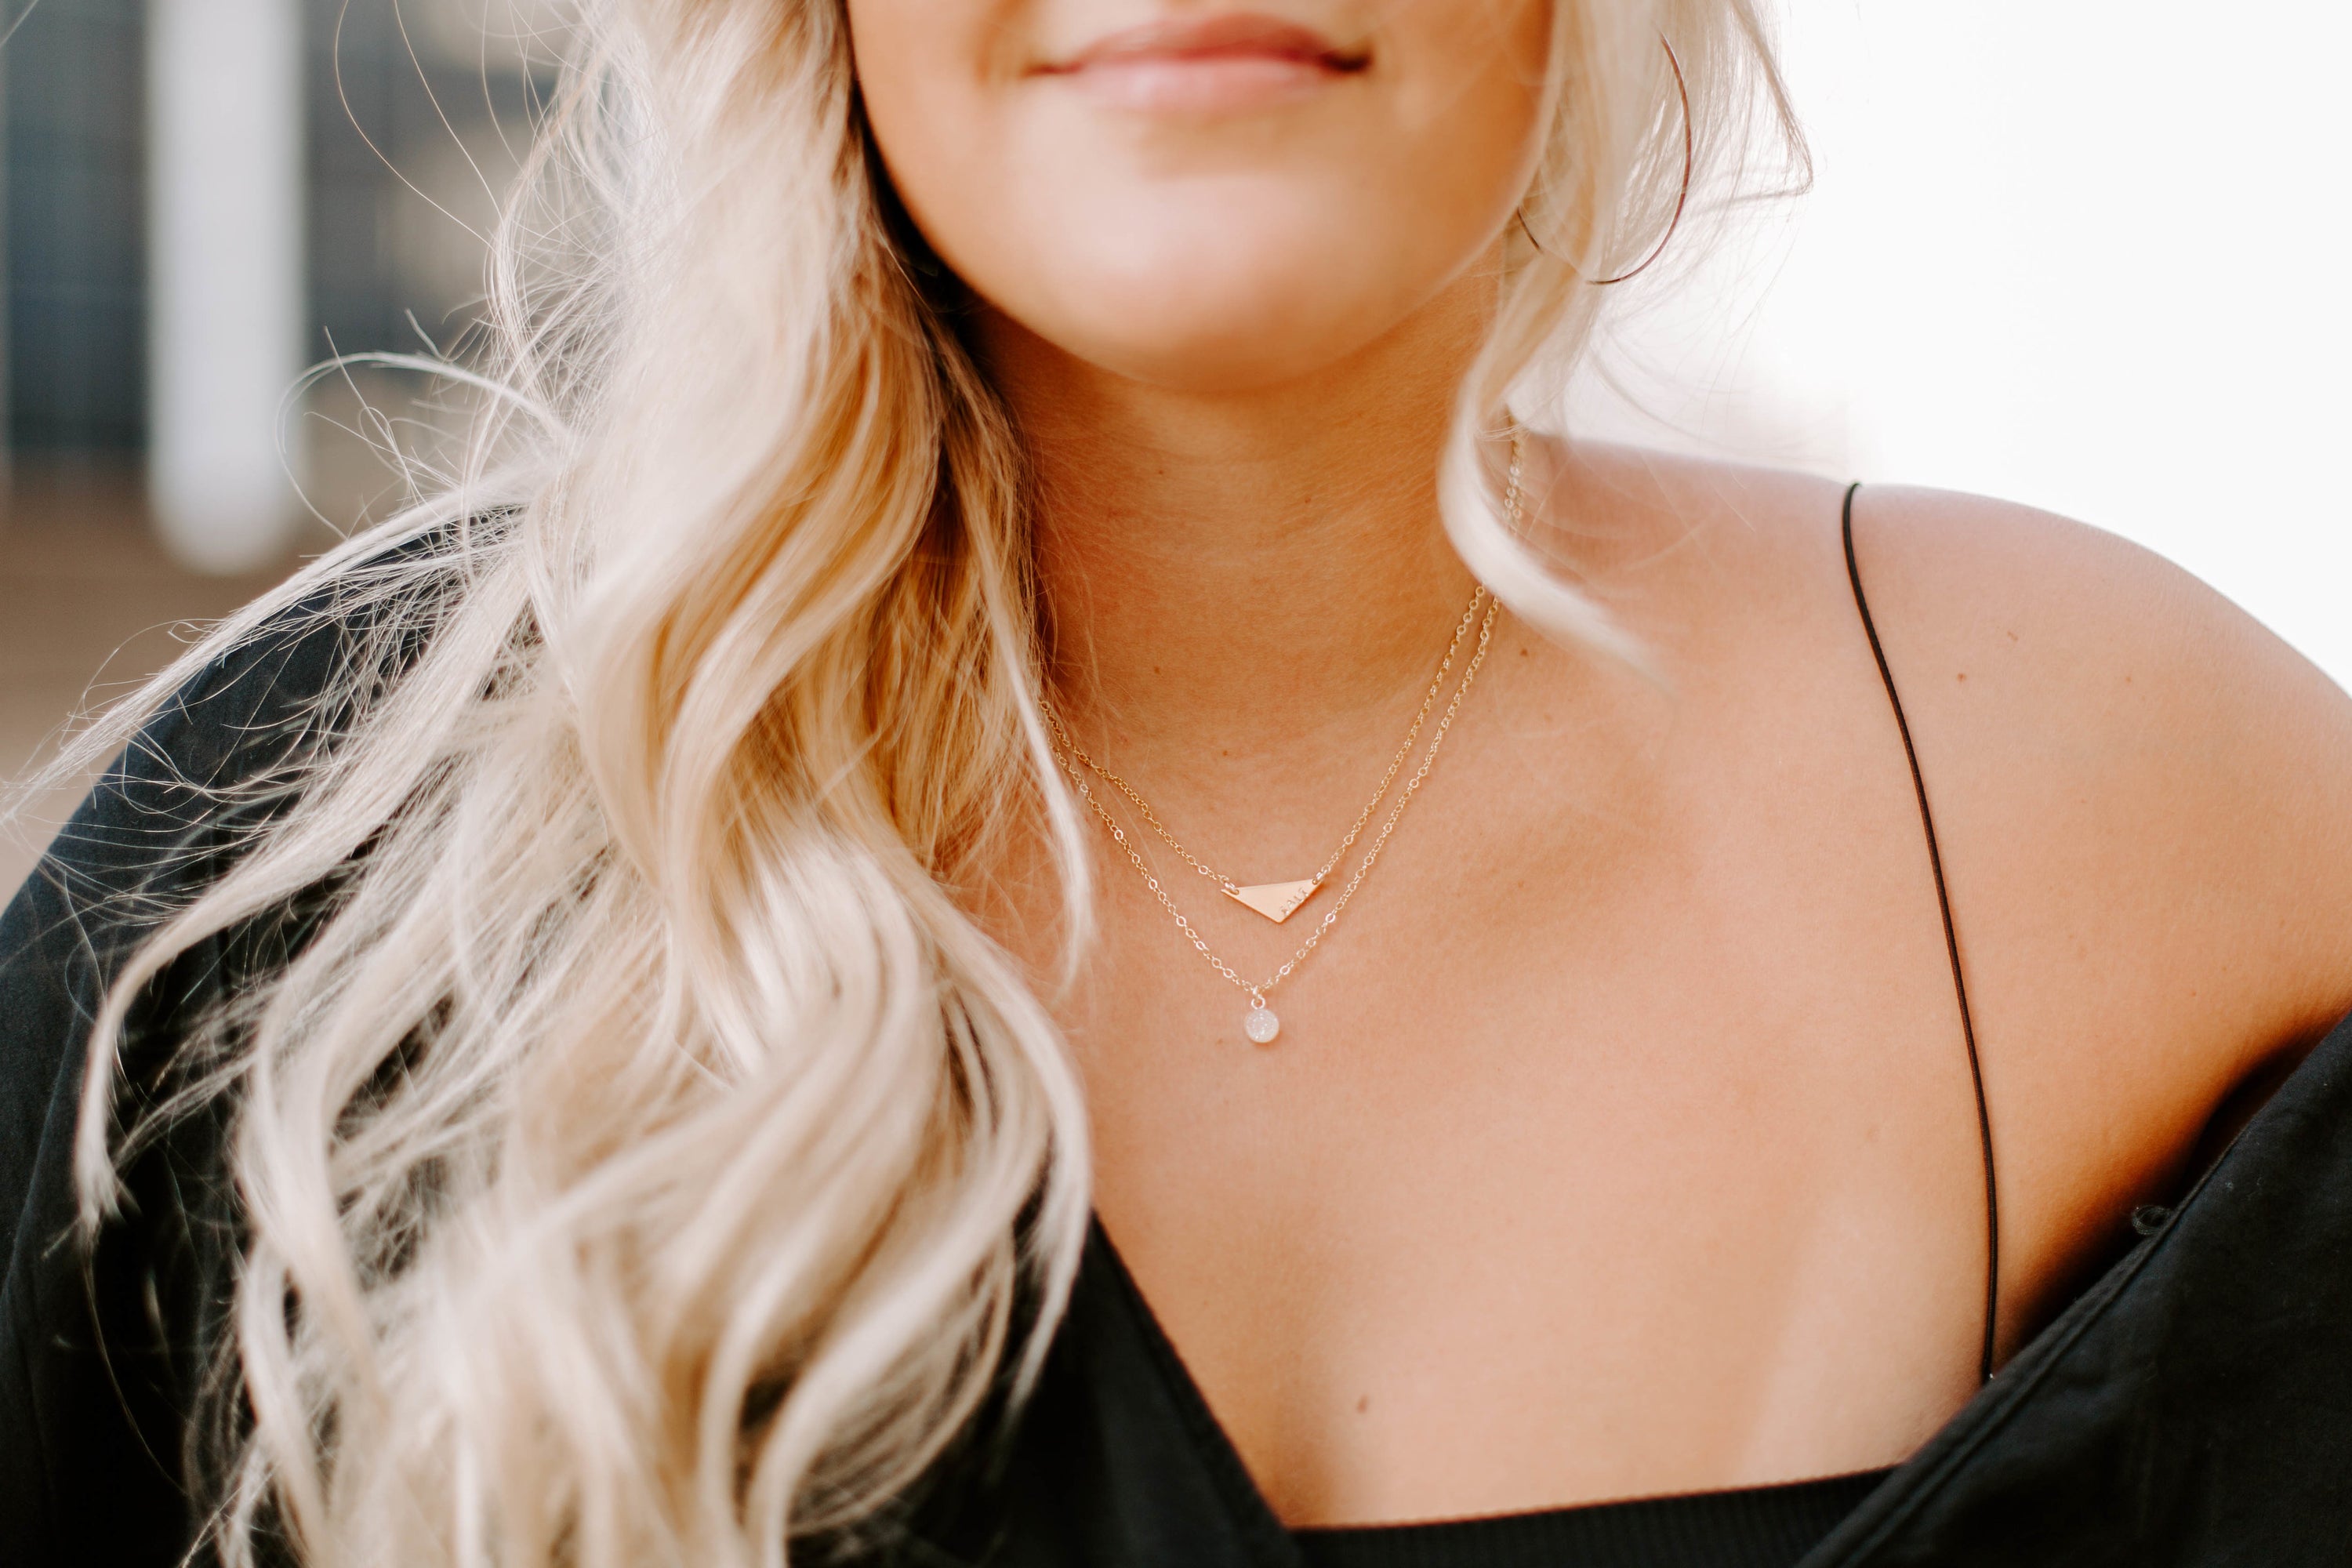 Be the Light Necklace